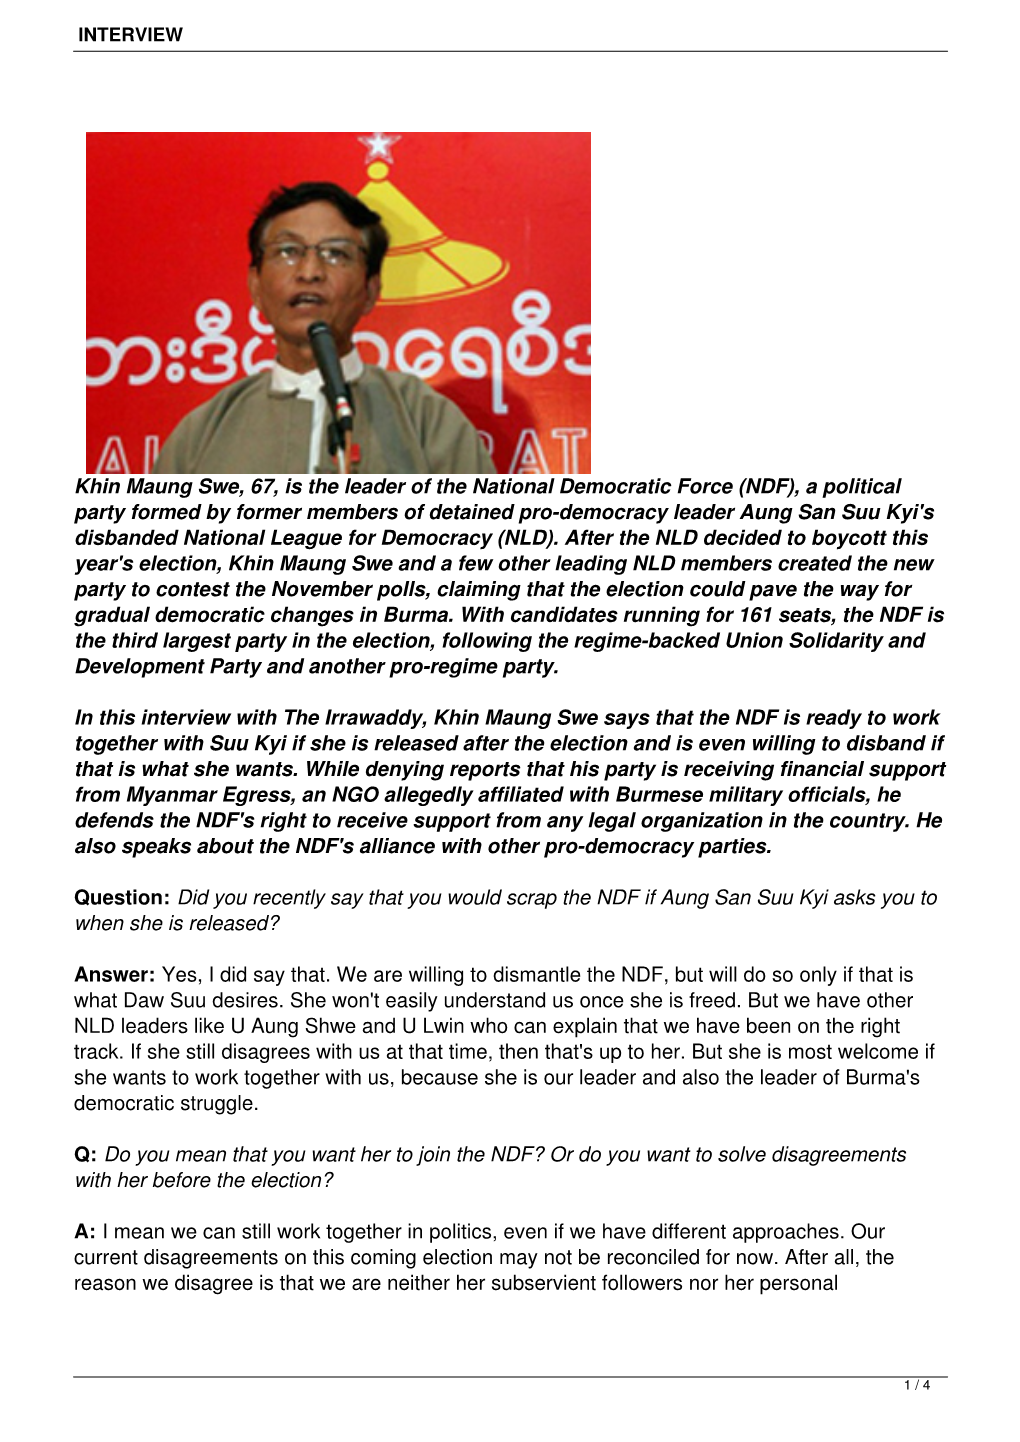 Khin Maung Swe, 67, Is the Leader of the National Democratic Force